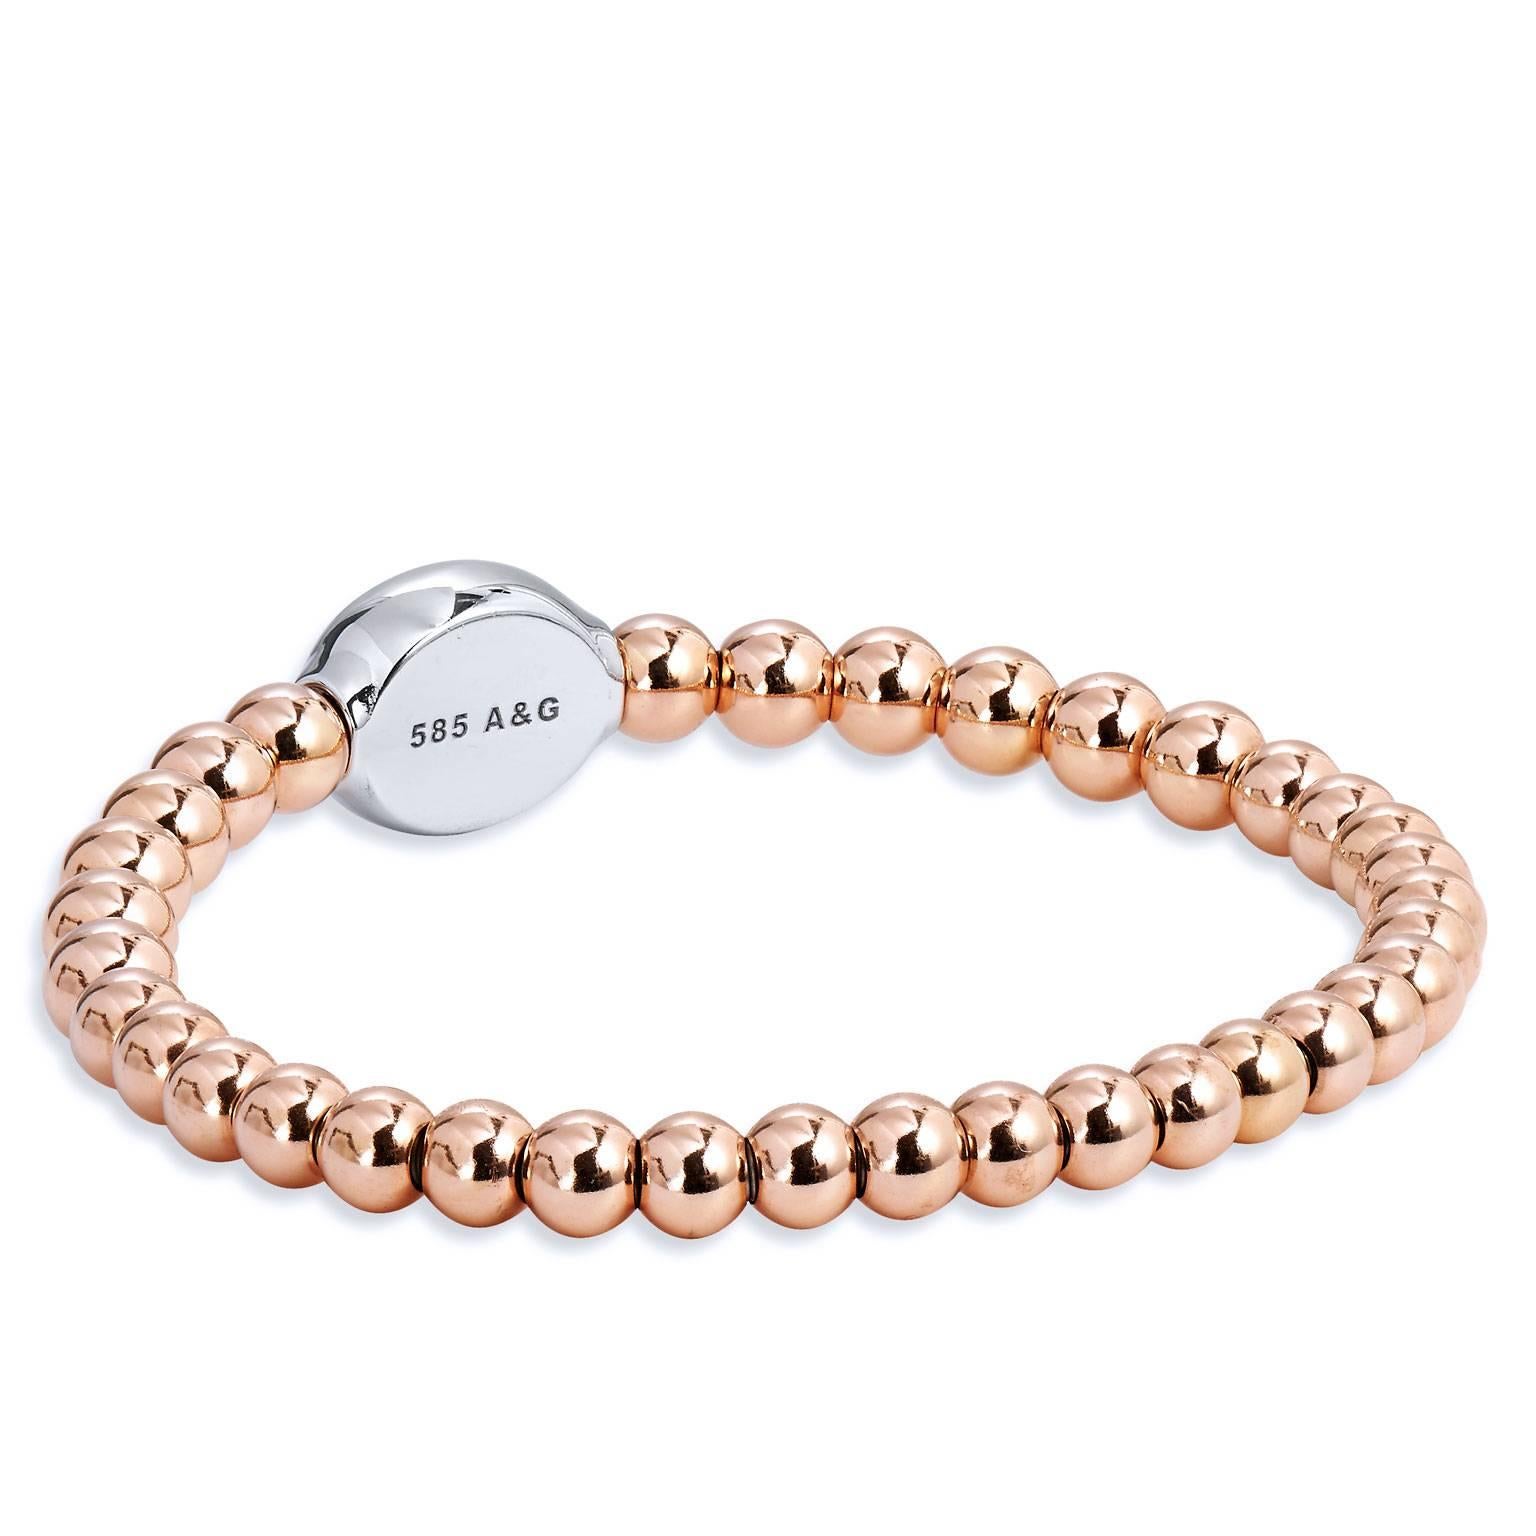 Bracelet with 14 karat rose gold beads (5mm to 5.5 mm bead size), white gold oval embellishment with 0.57 carat of diamond pave set and surgical steel insert.